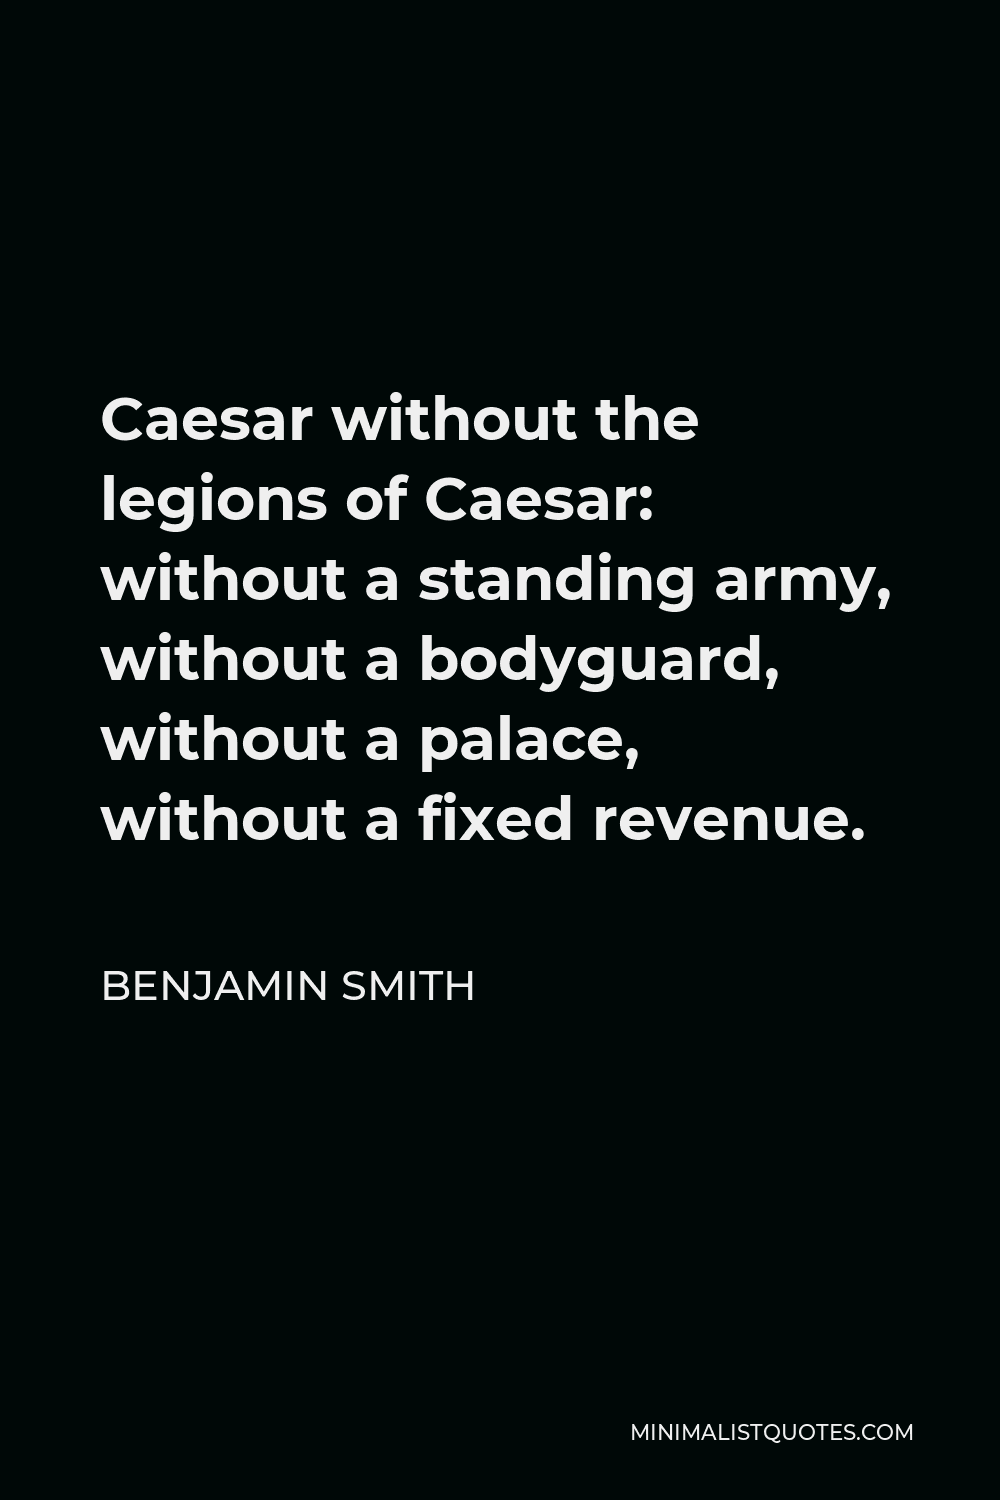 Benjamin Smith Quote - Caesar without the legions of Caesar: without a standing army, without a bodyguard, without a palace, without a fixed revenue.